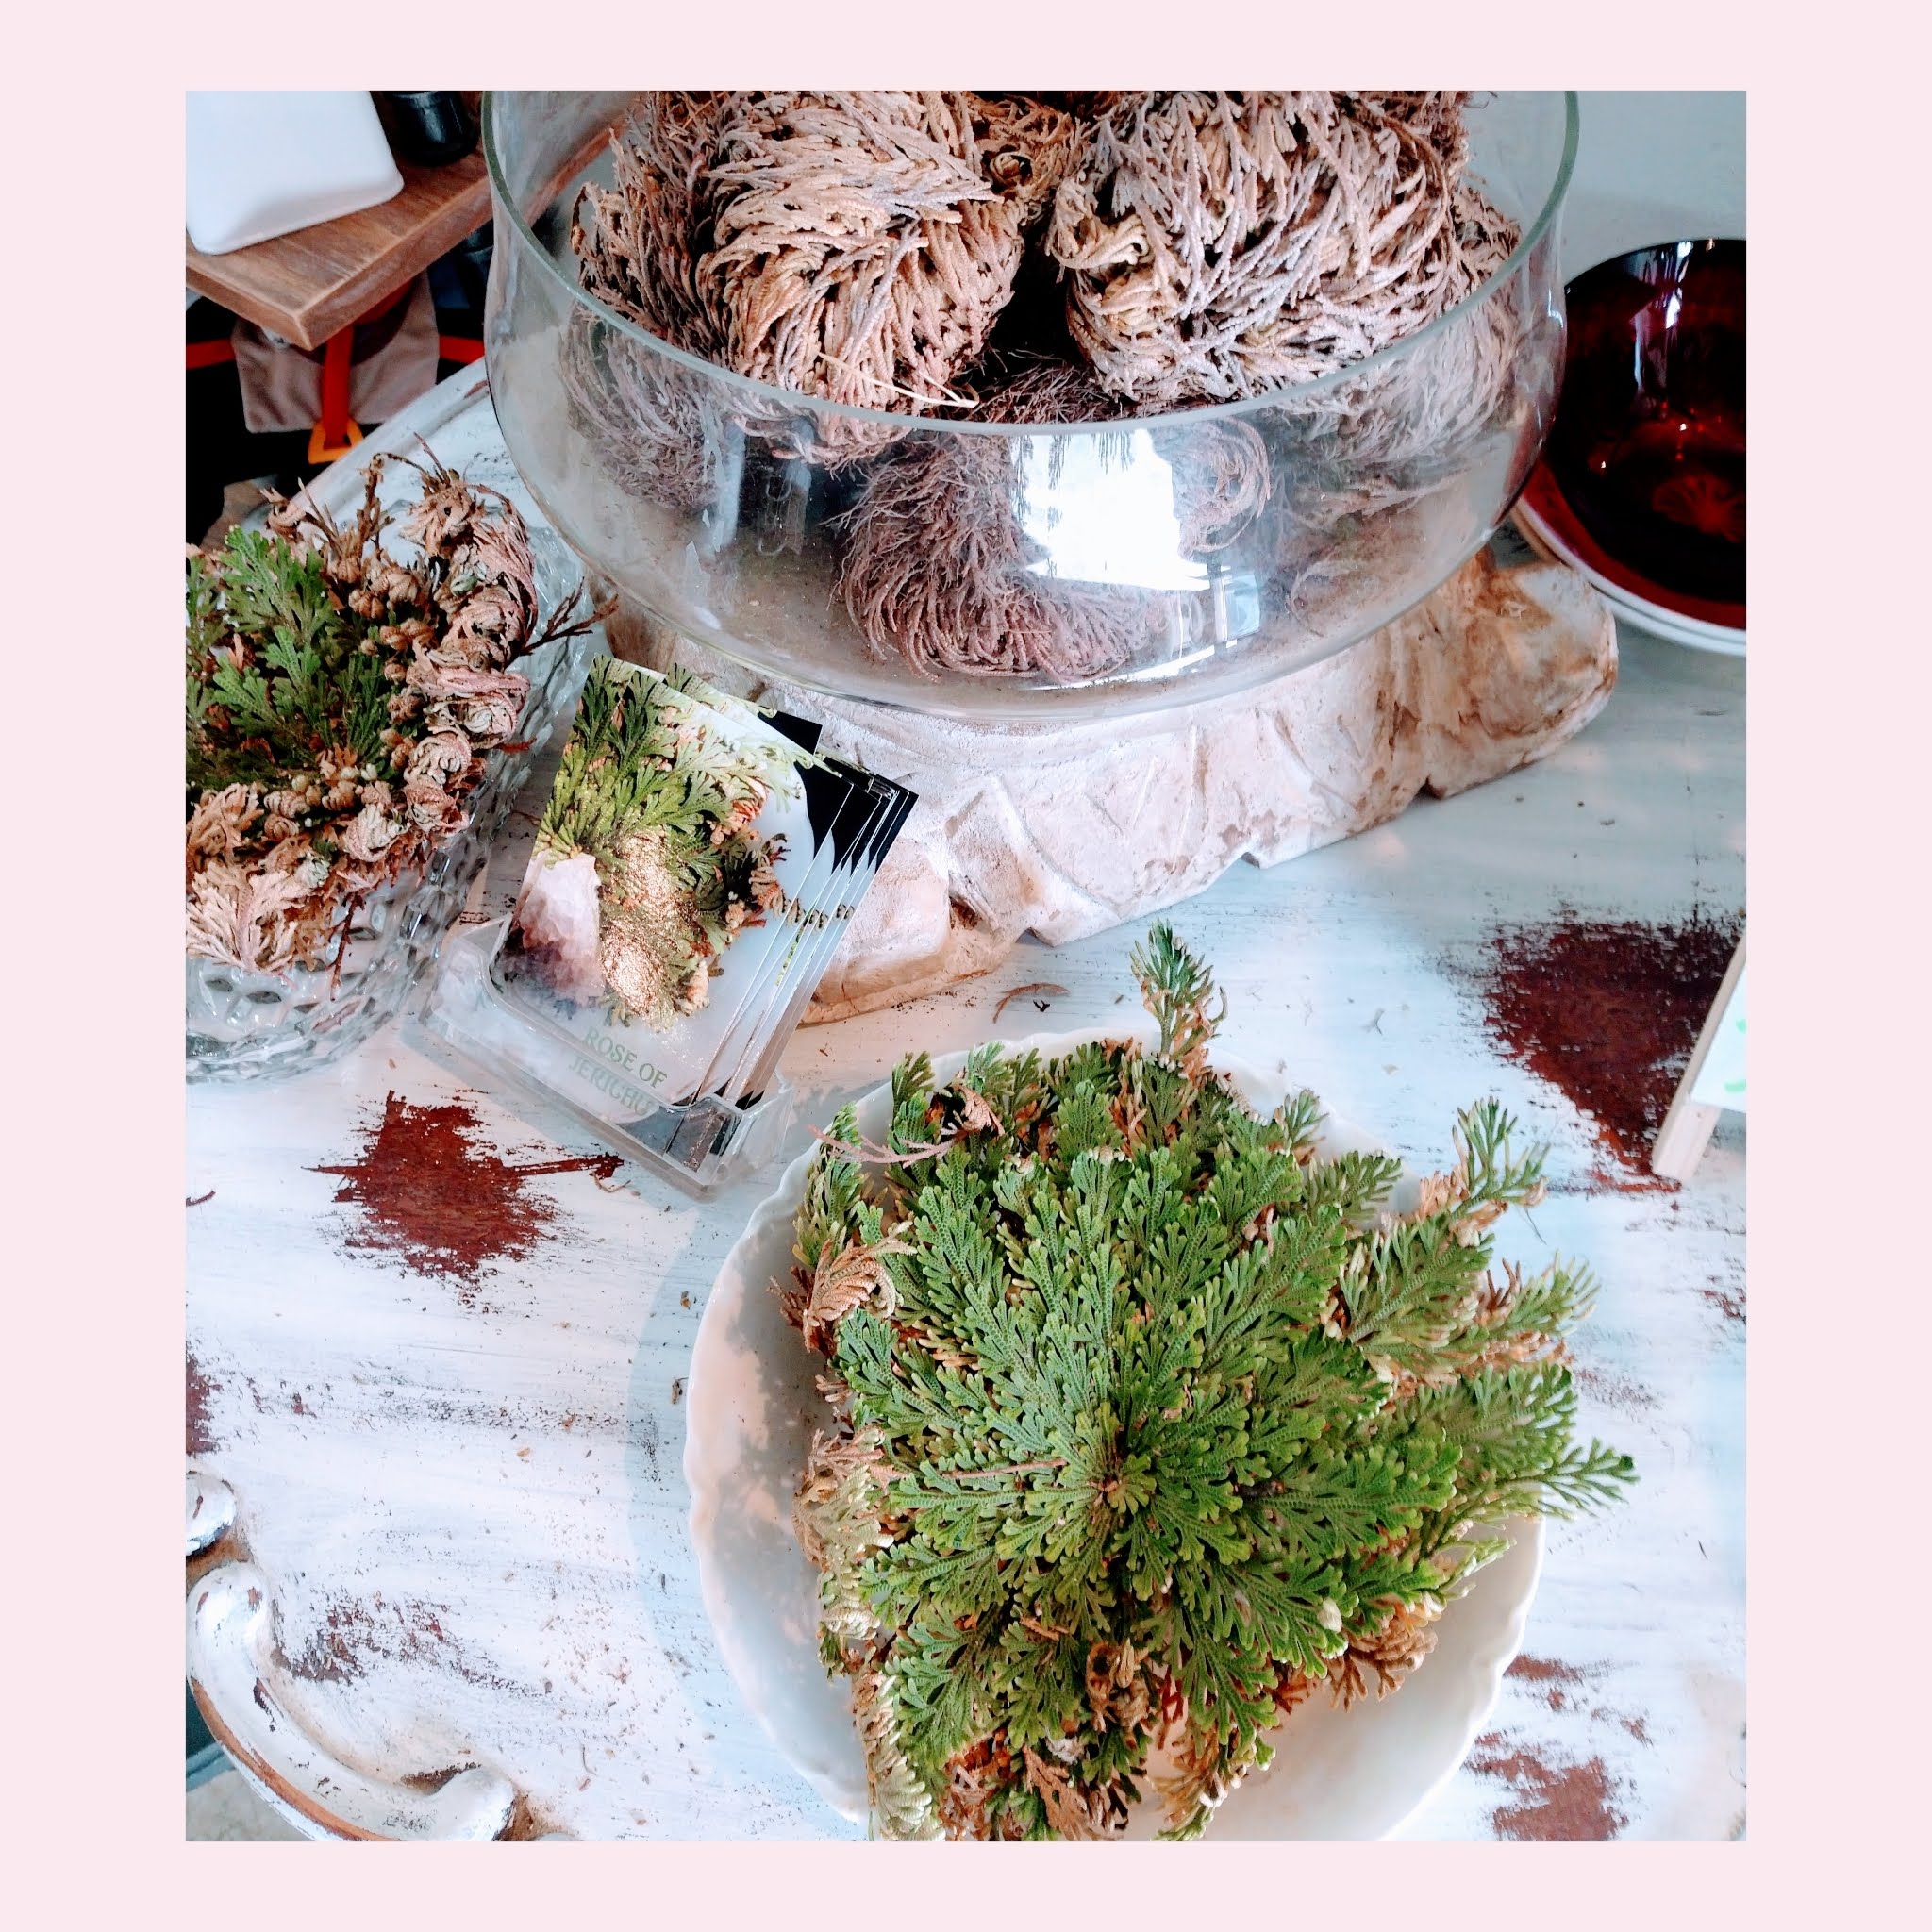 The Spiritual Uses of Rose of Jericho: The Resurrection Plant